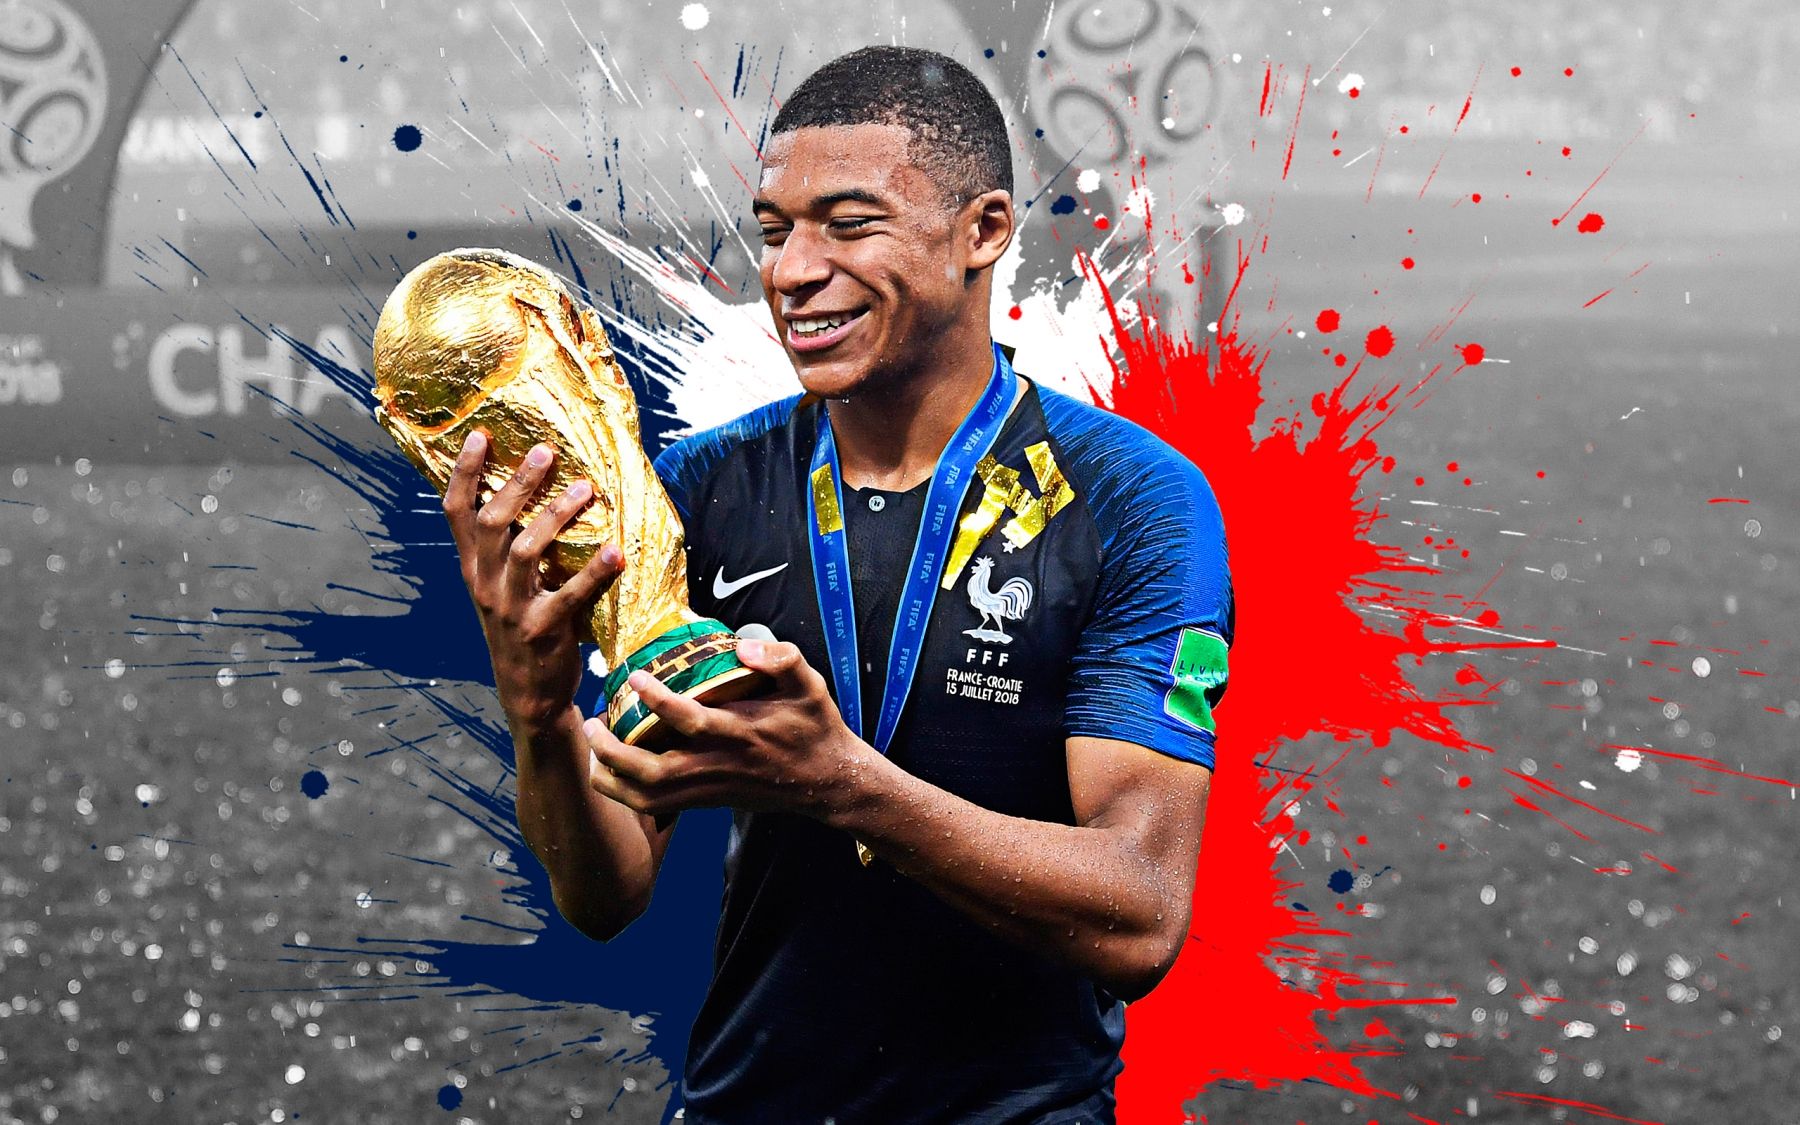 Kylian Mbappé 2019 France Wallpaper and Background Image